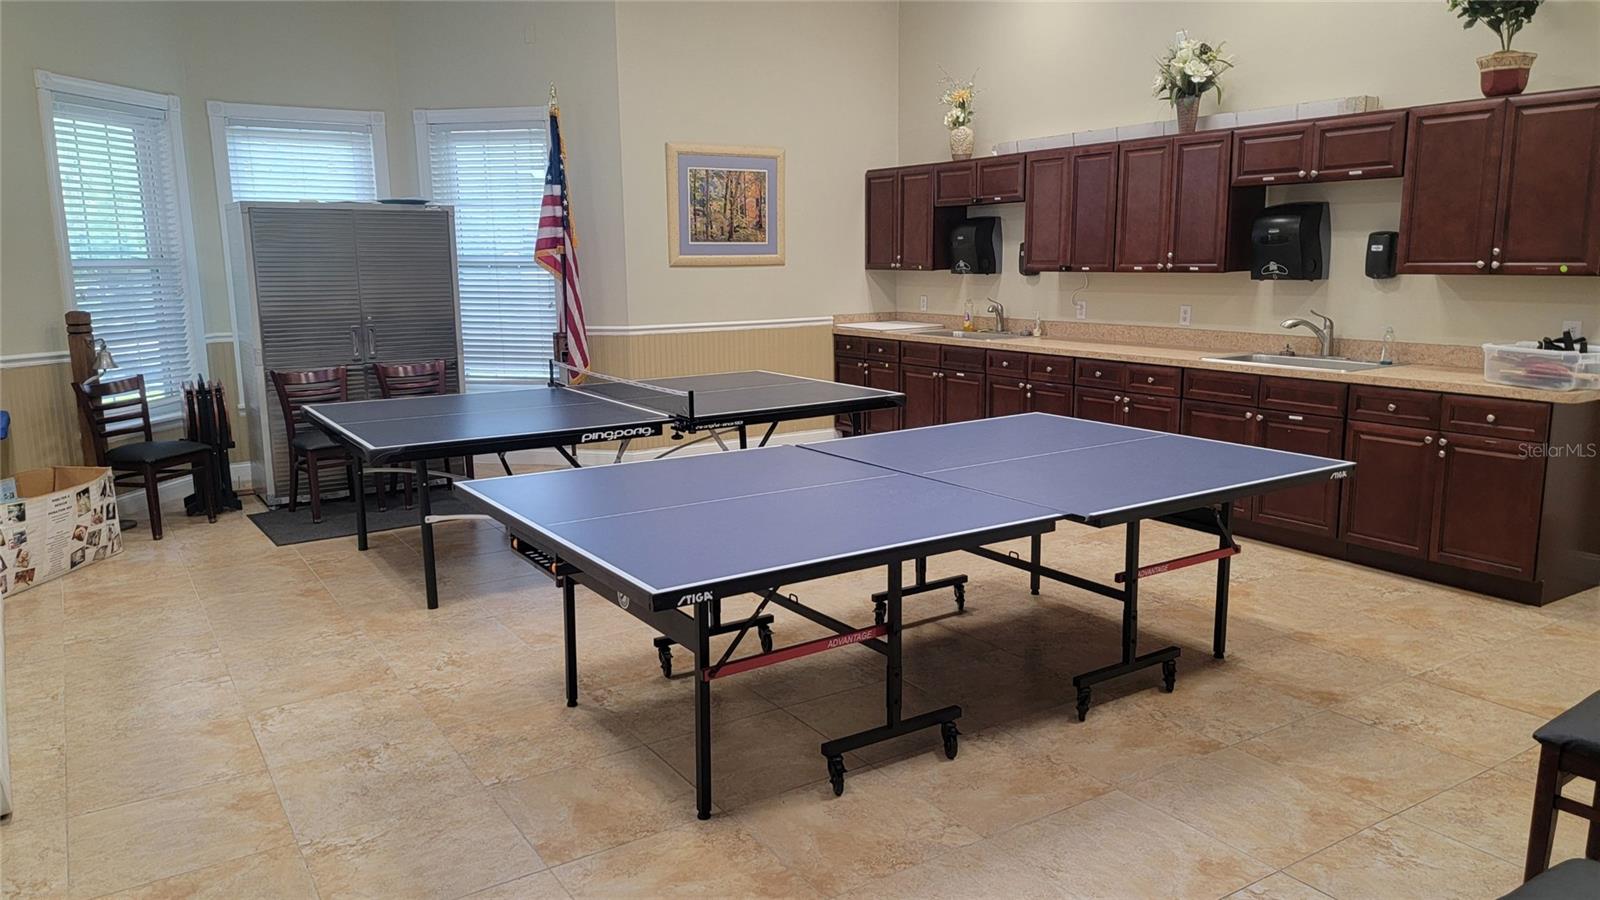 Ping pong/craft area